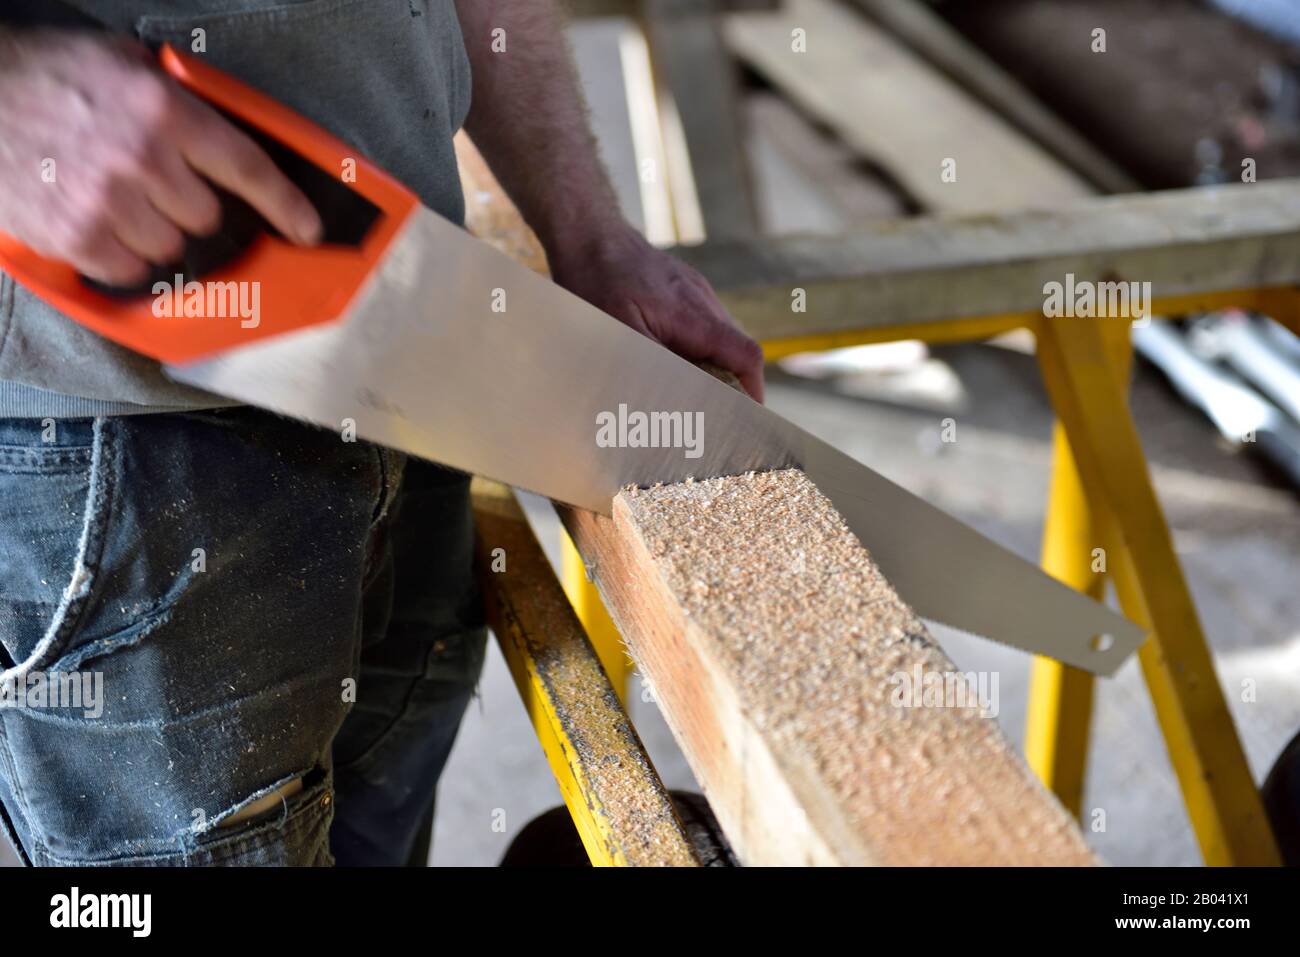 Workman using hand saw to cut through new timber beams Stock Photo